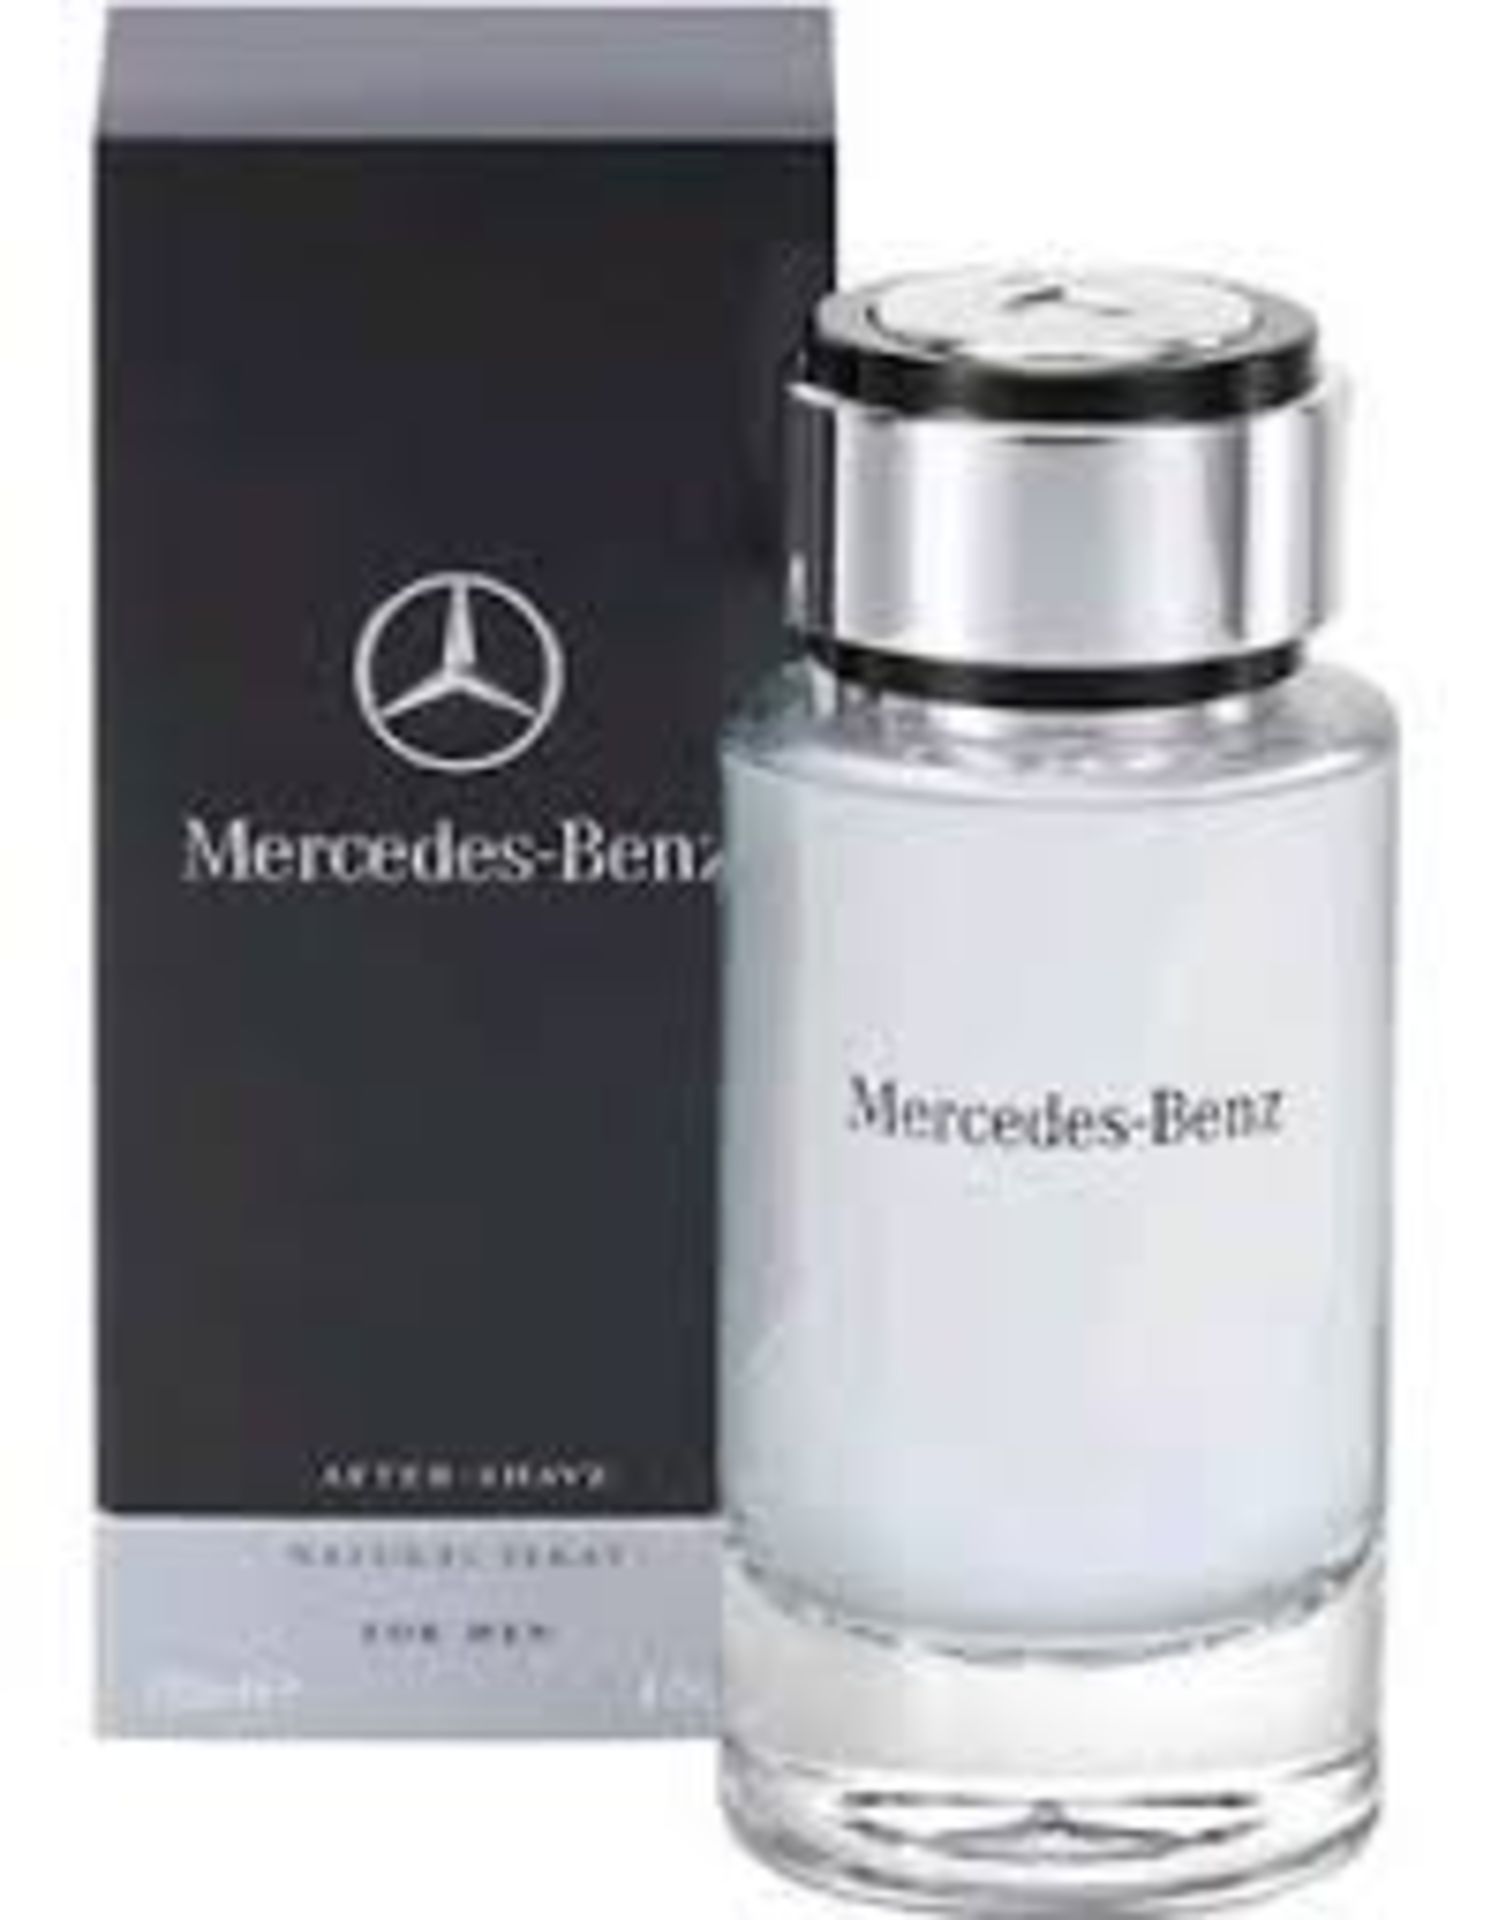 V Brand New Mercedes-Benz 120ml Aftershave Spray for men - Amazon price £21.49